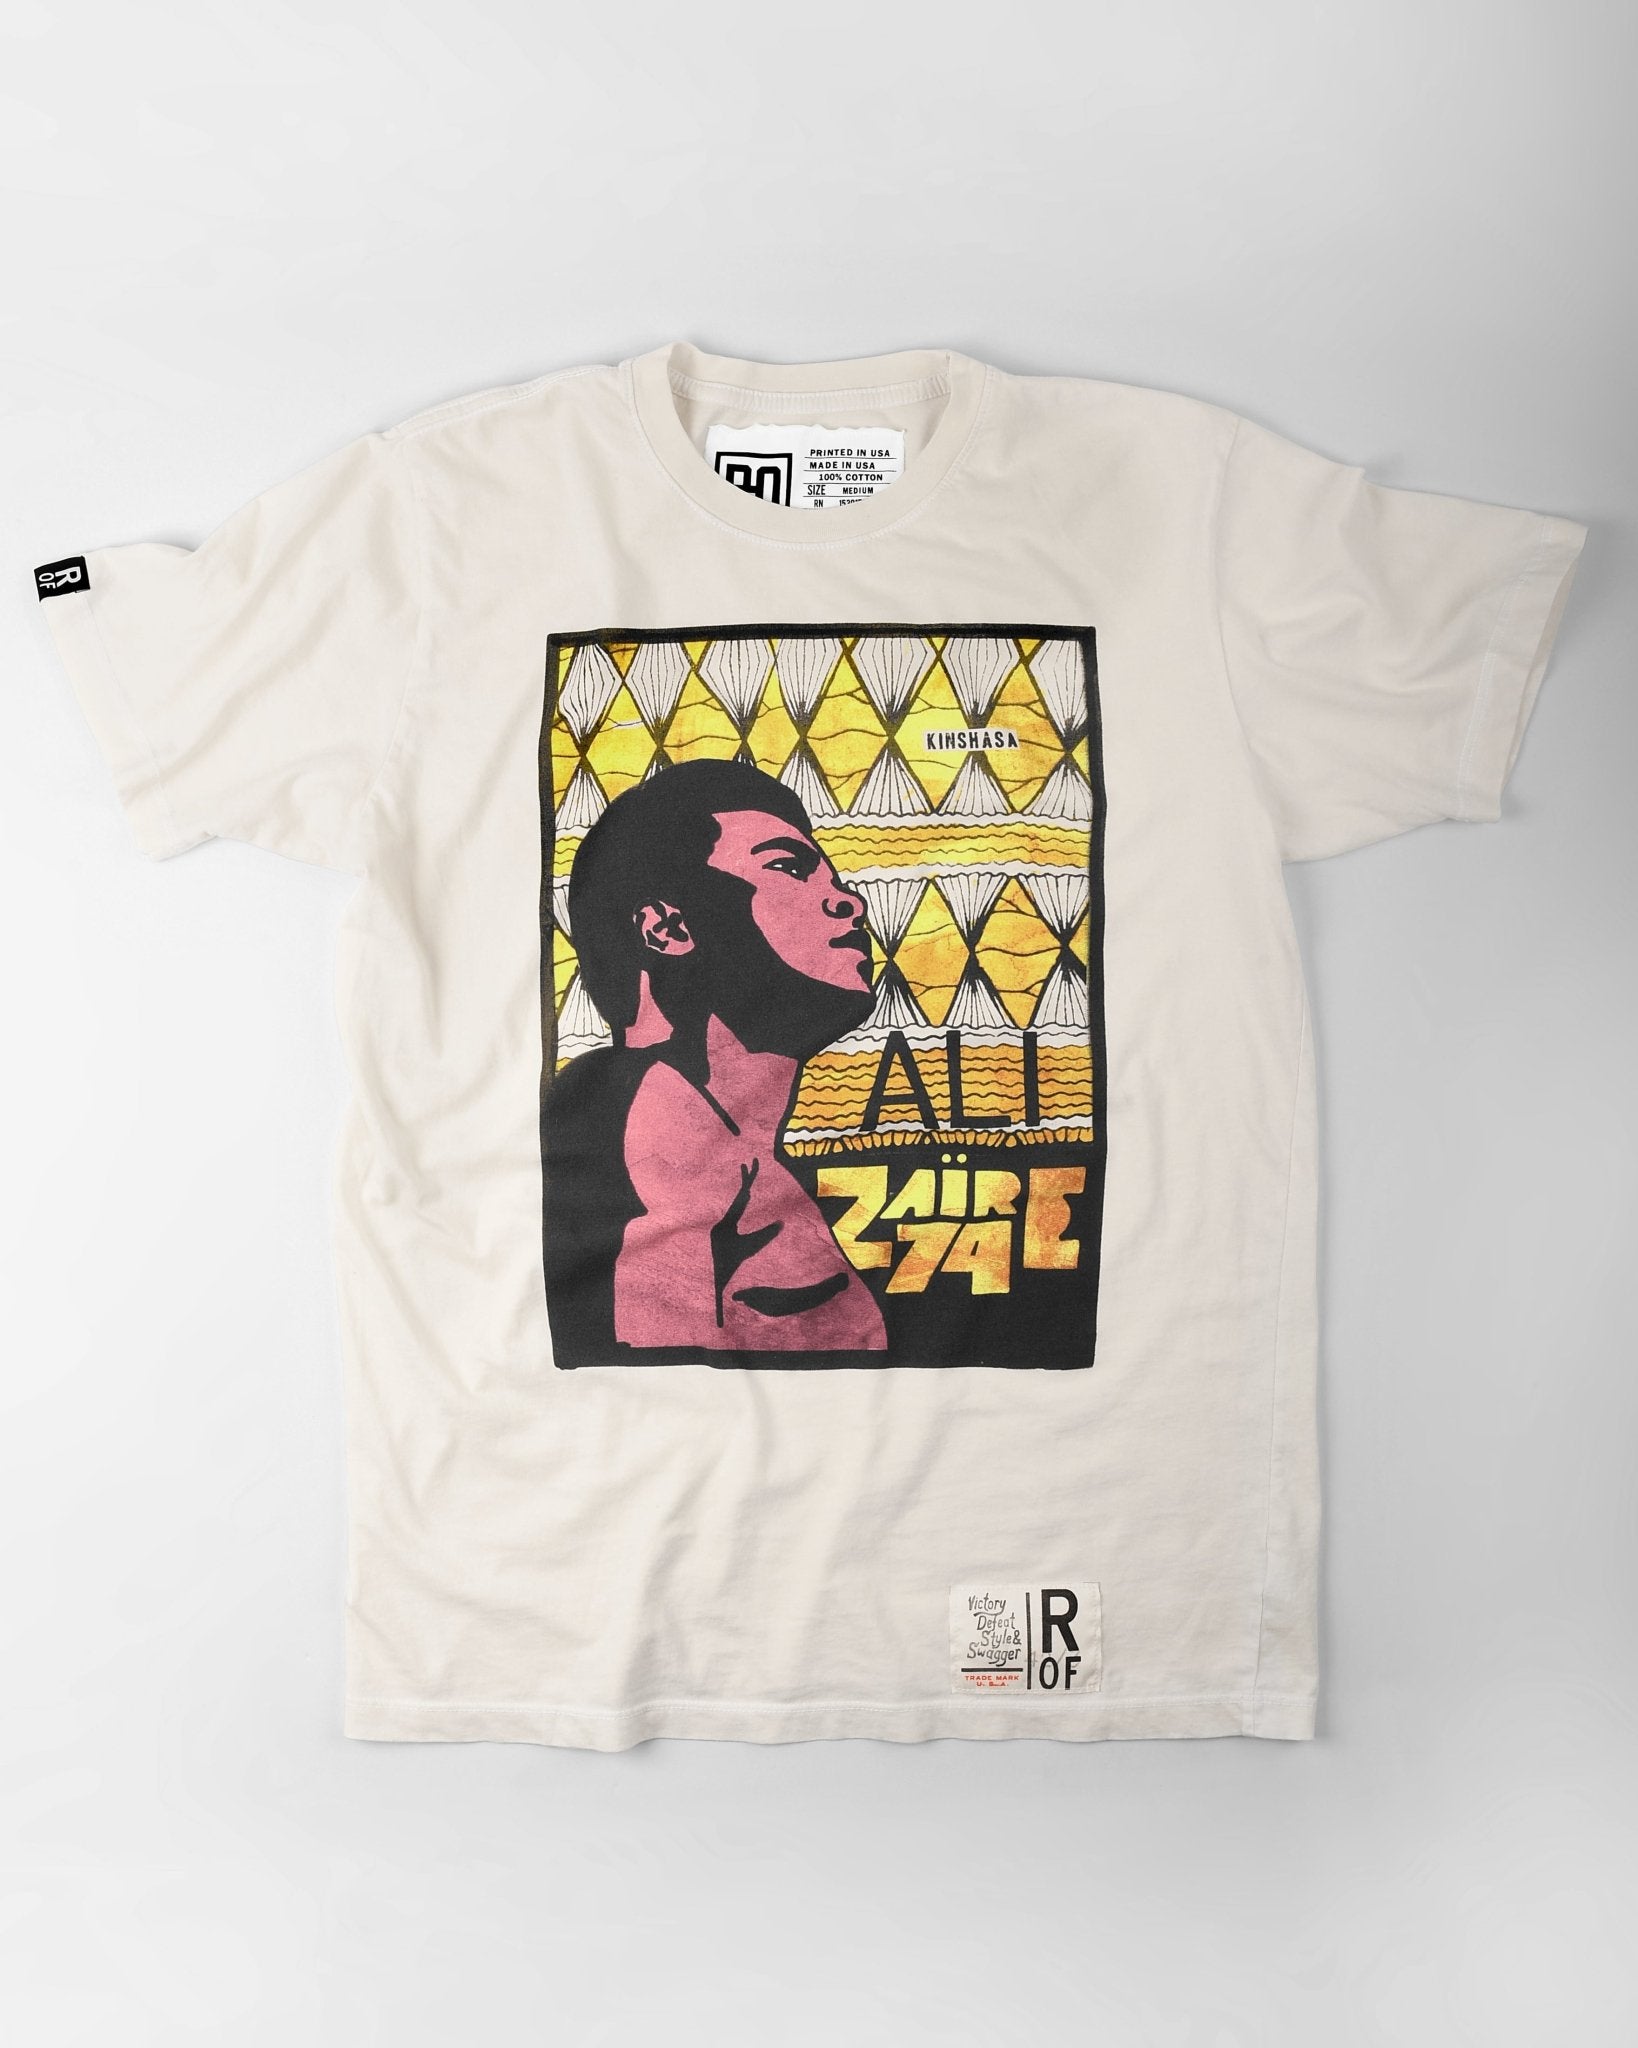 Ali Rumble Zaire 74 Profile Tee - Roots of Fight